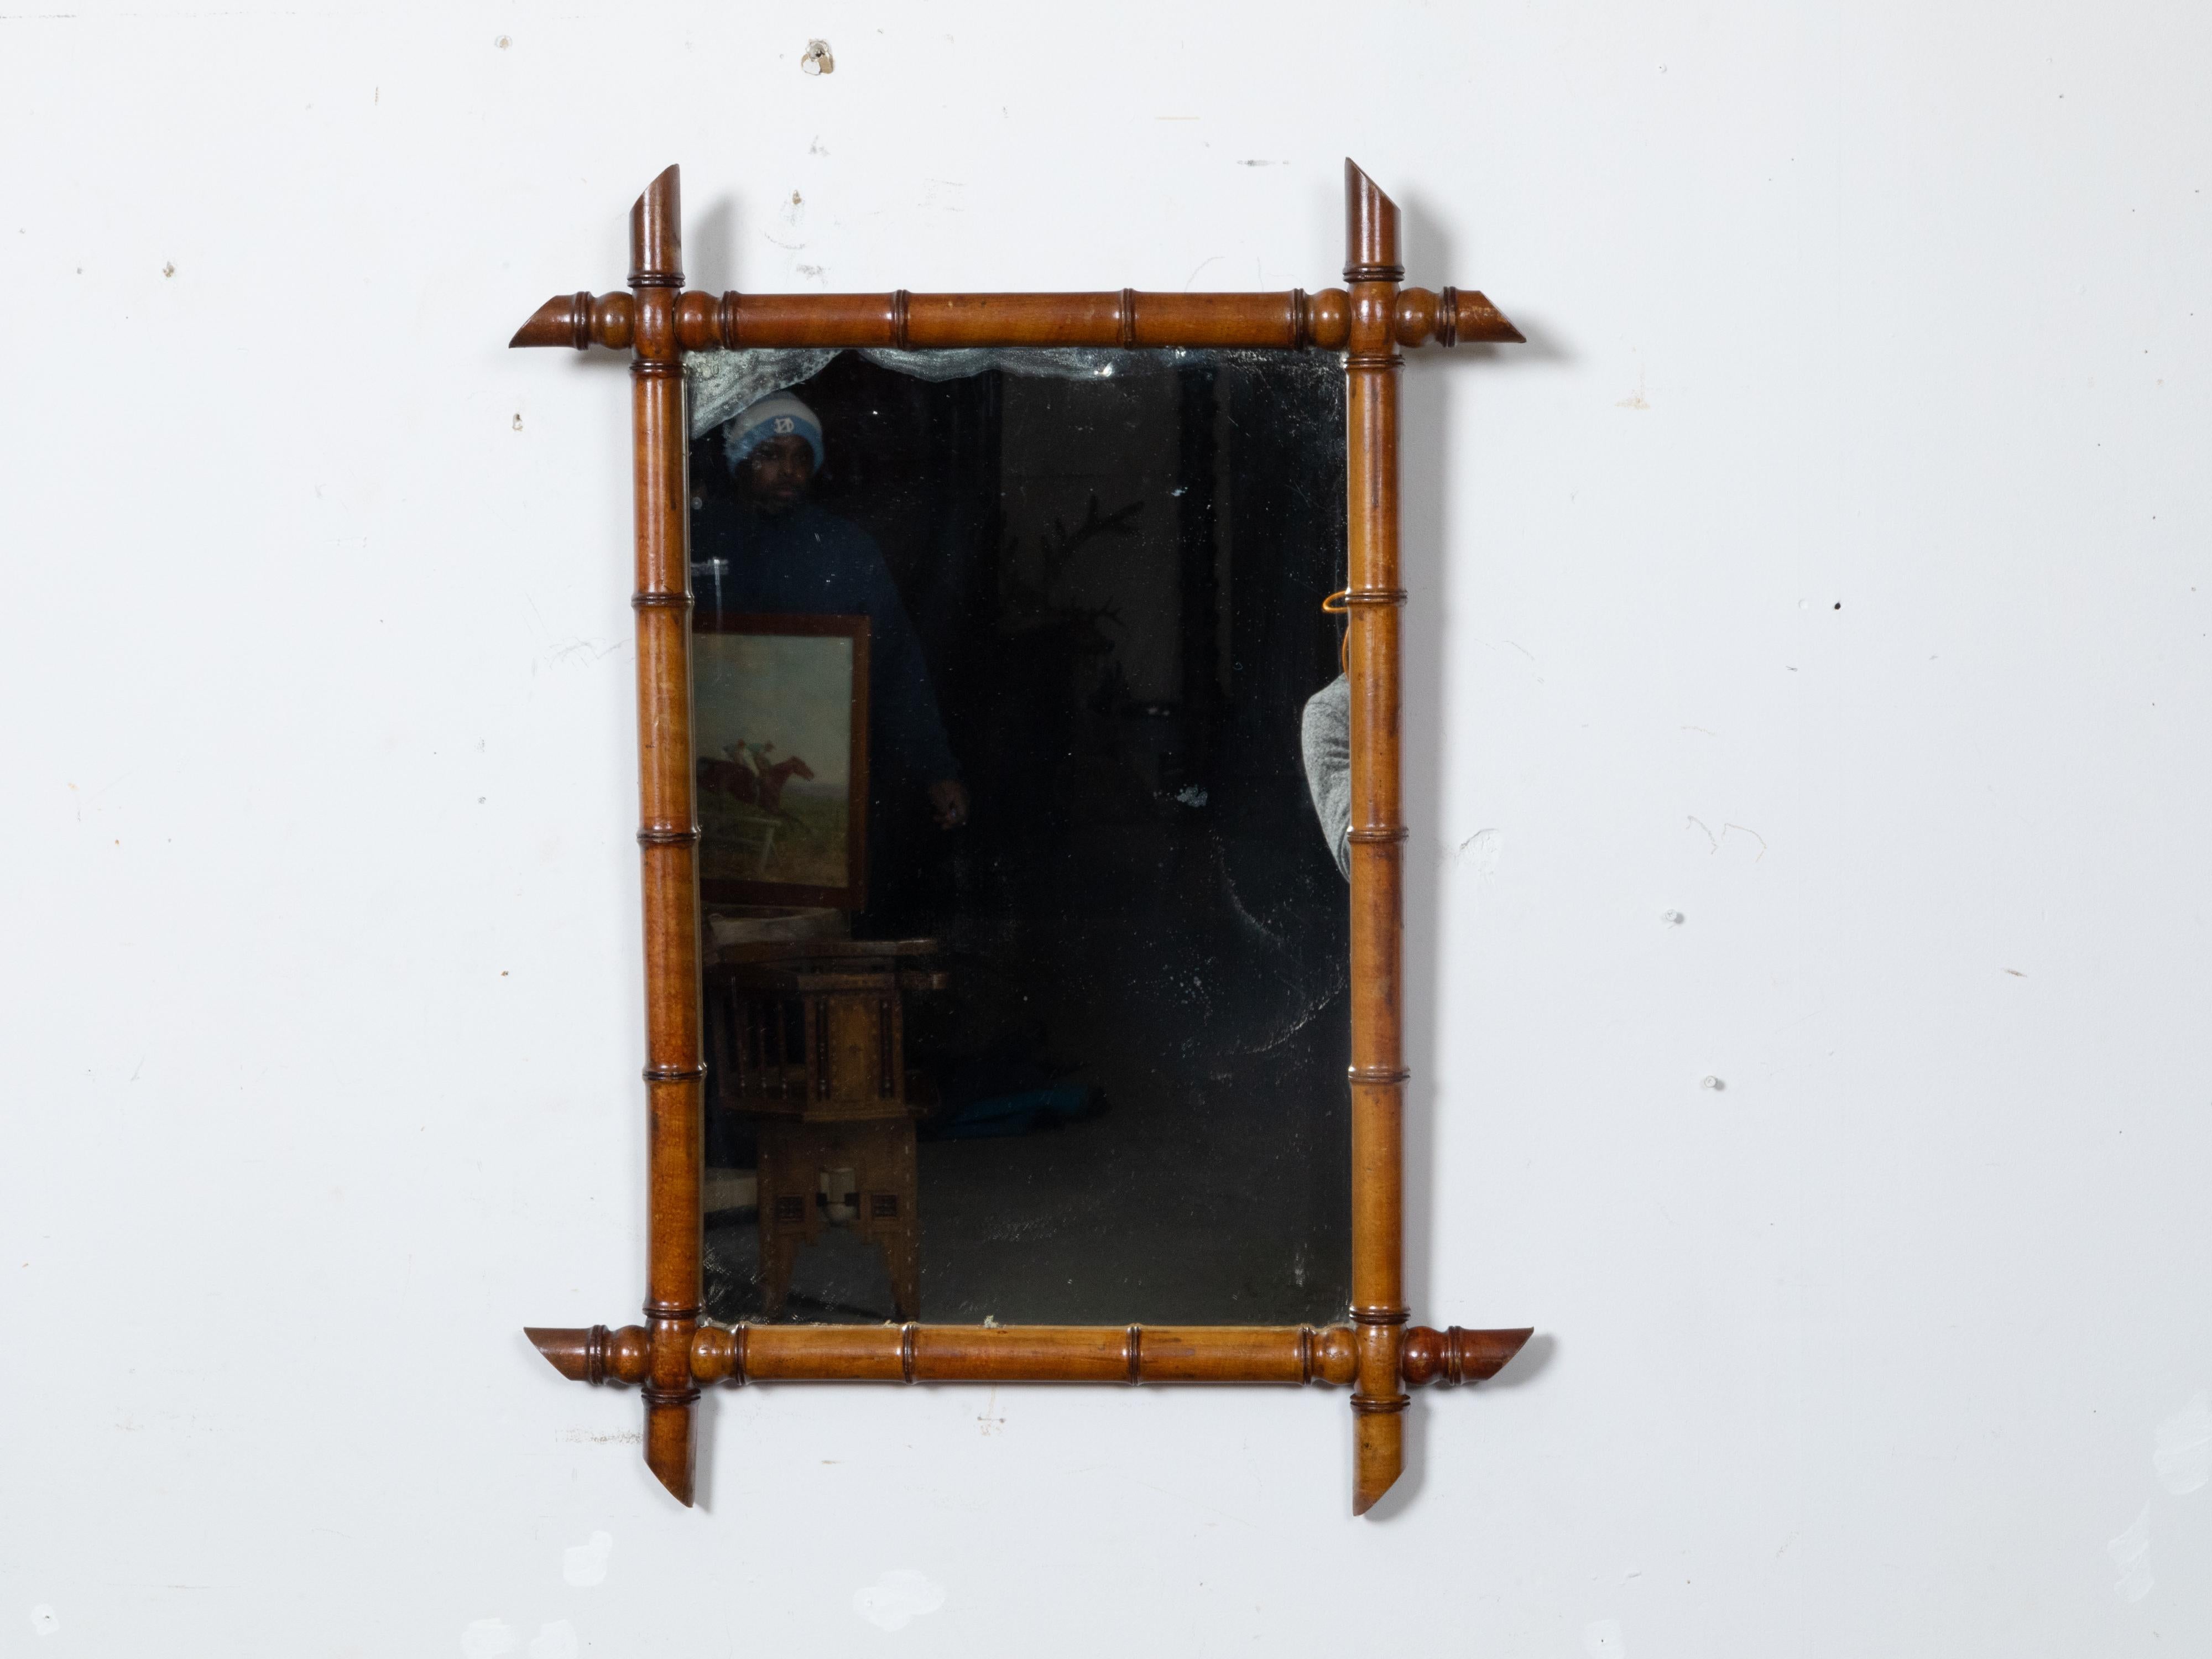 A French Turn of the Century brown faux bamboo wall mirror, dating back to circa 1900, presenting intersecting corners, rich brown color, and traces of aging on the mirror plate.

The mirror's wooden frame, skillfully crafted to resemble bamboo,